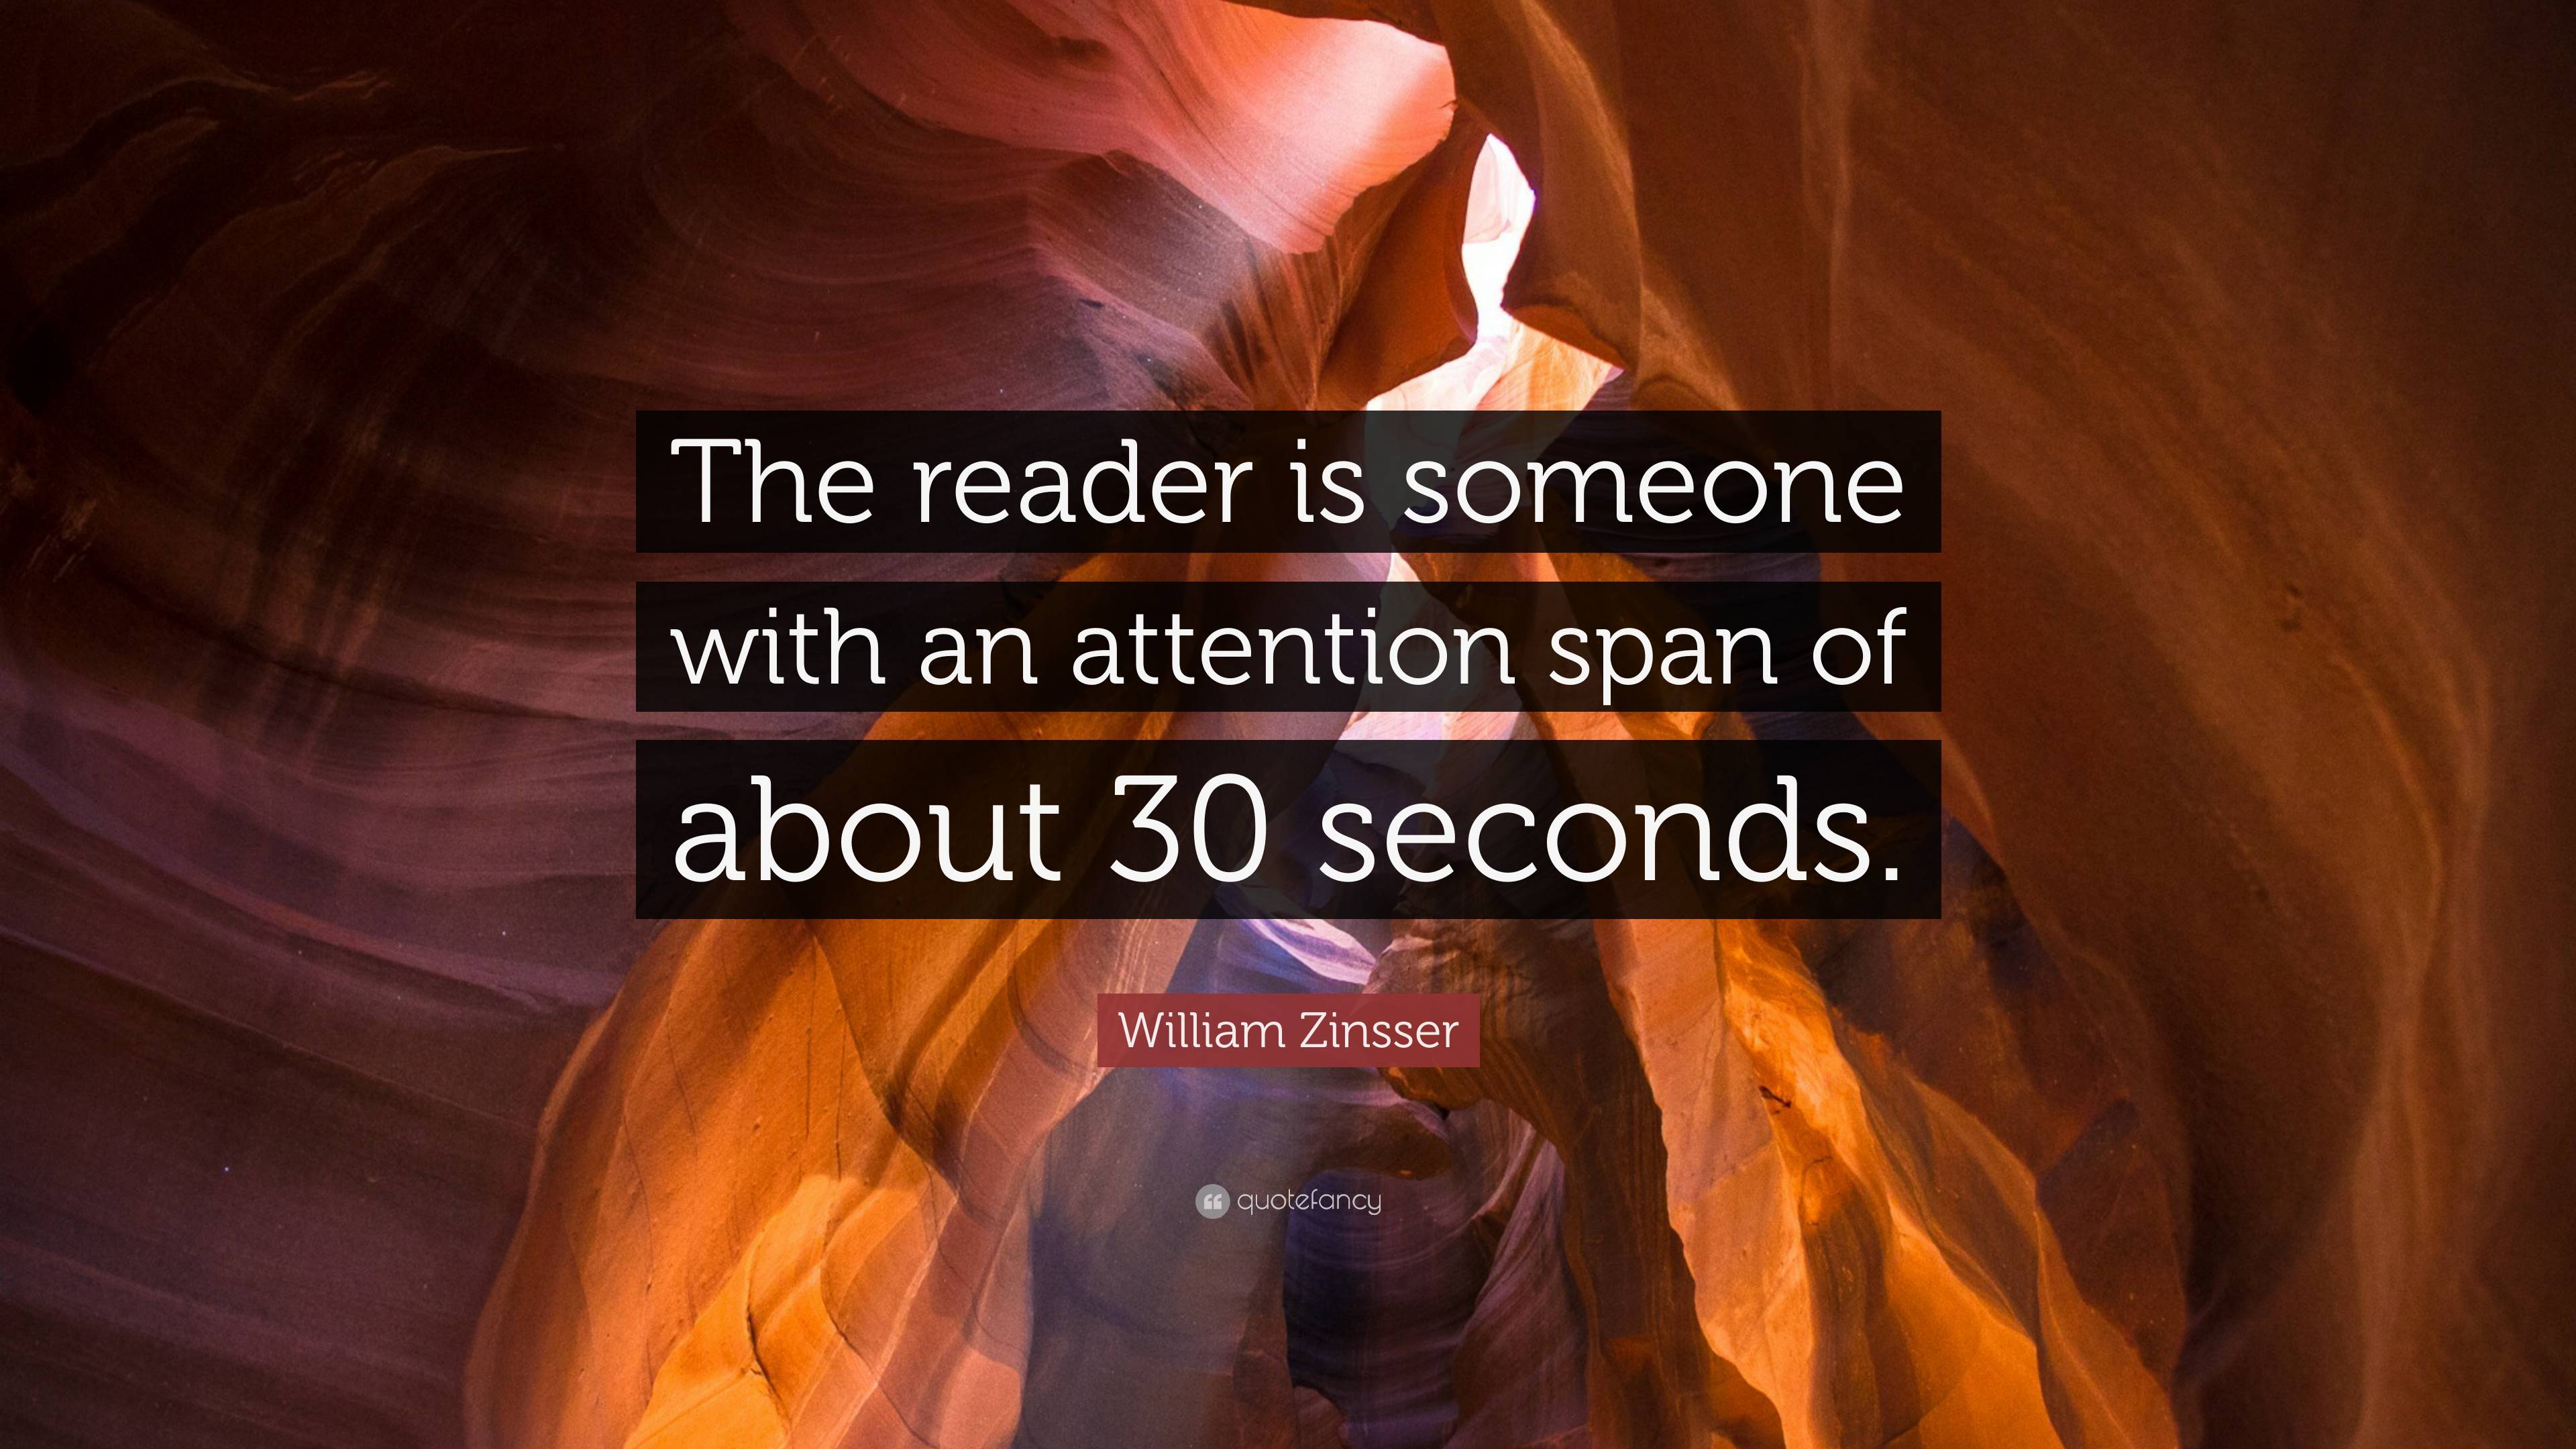 William Zinsser Quote: “The reader is someone with an attention span of ...